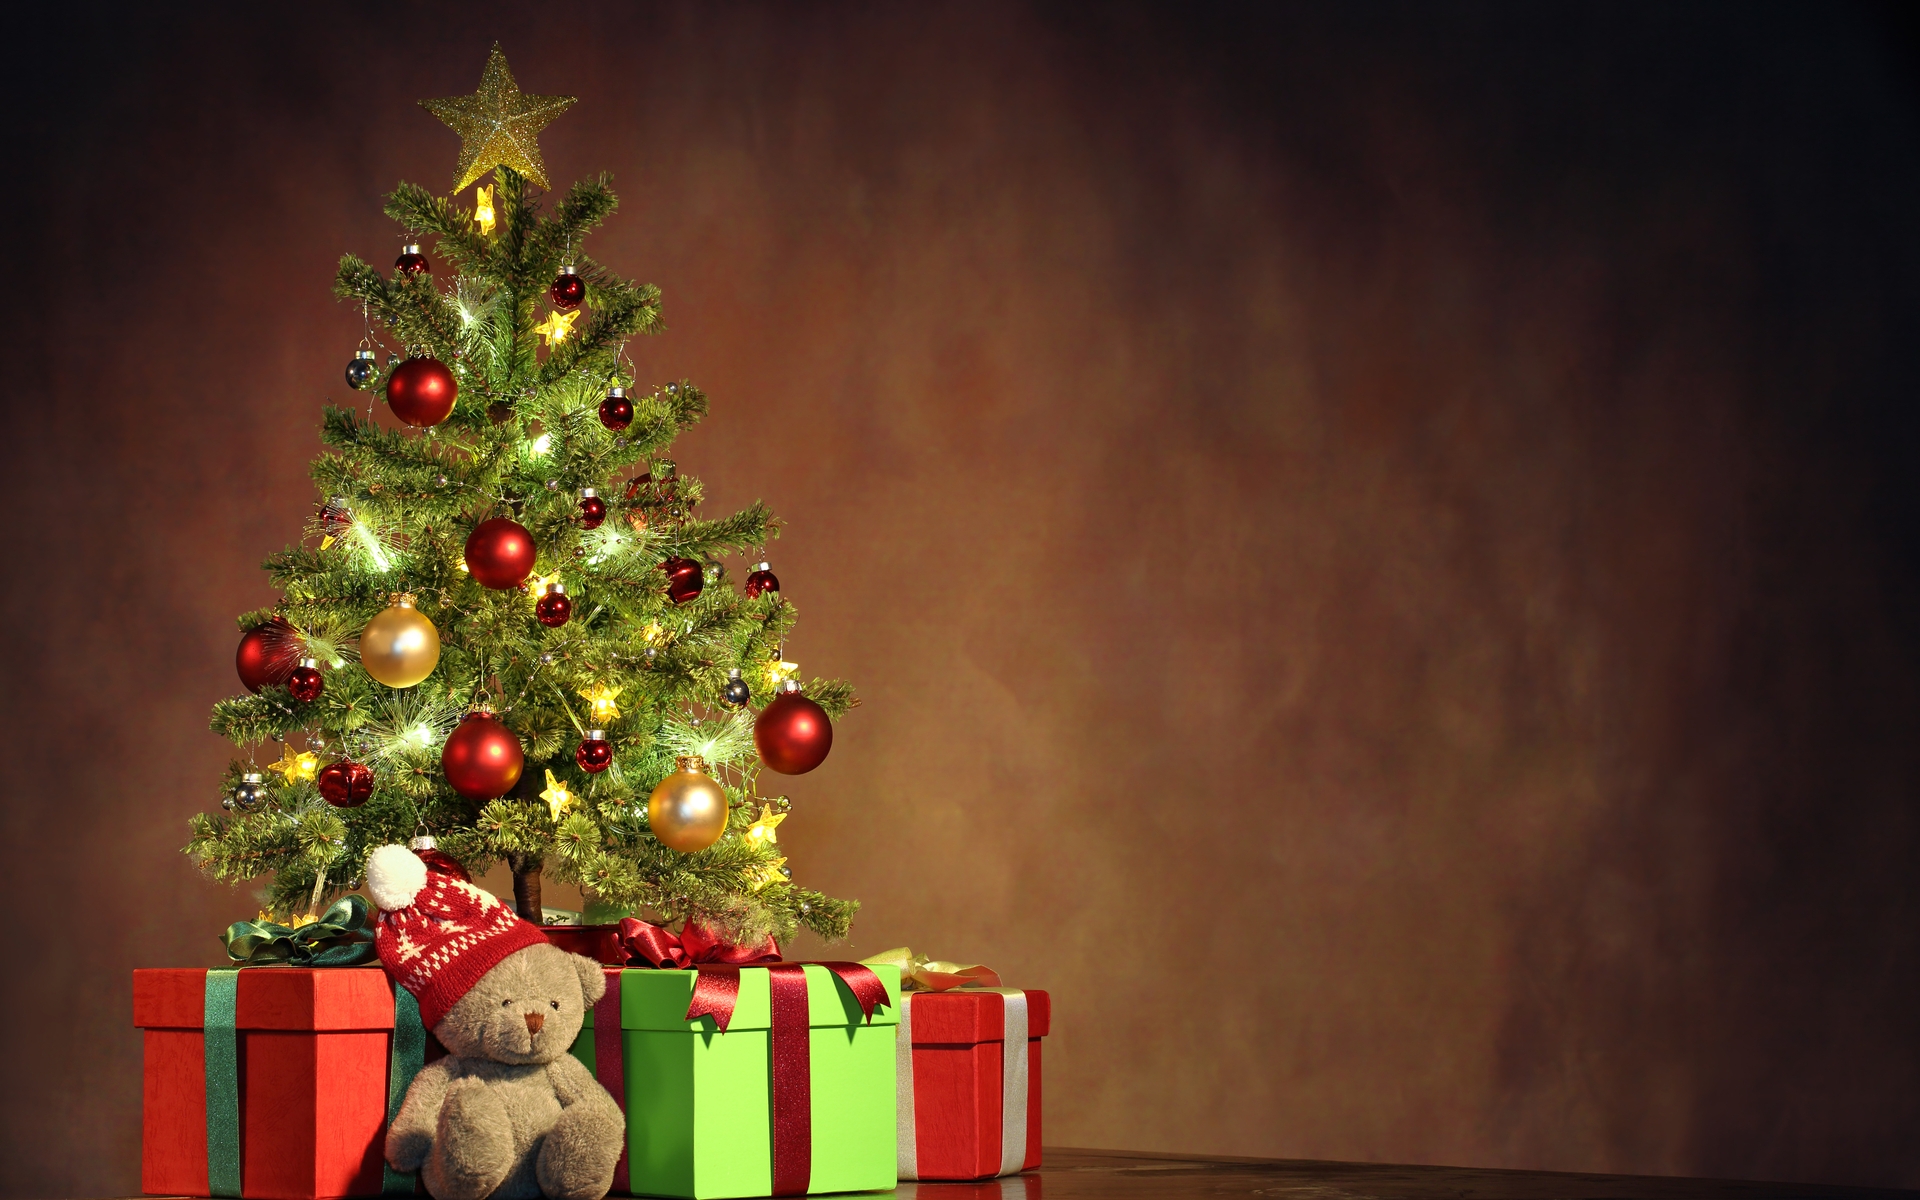 Image: Christmas, new year, gifts, Teddy bear, toy, tree, star, decoration, balloons, fancy